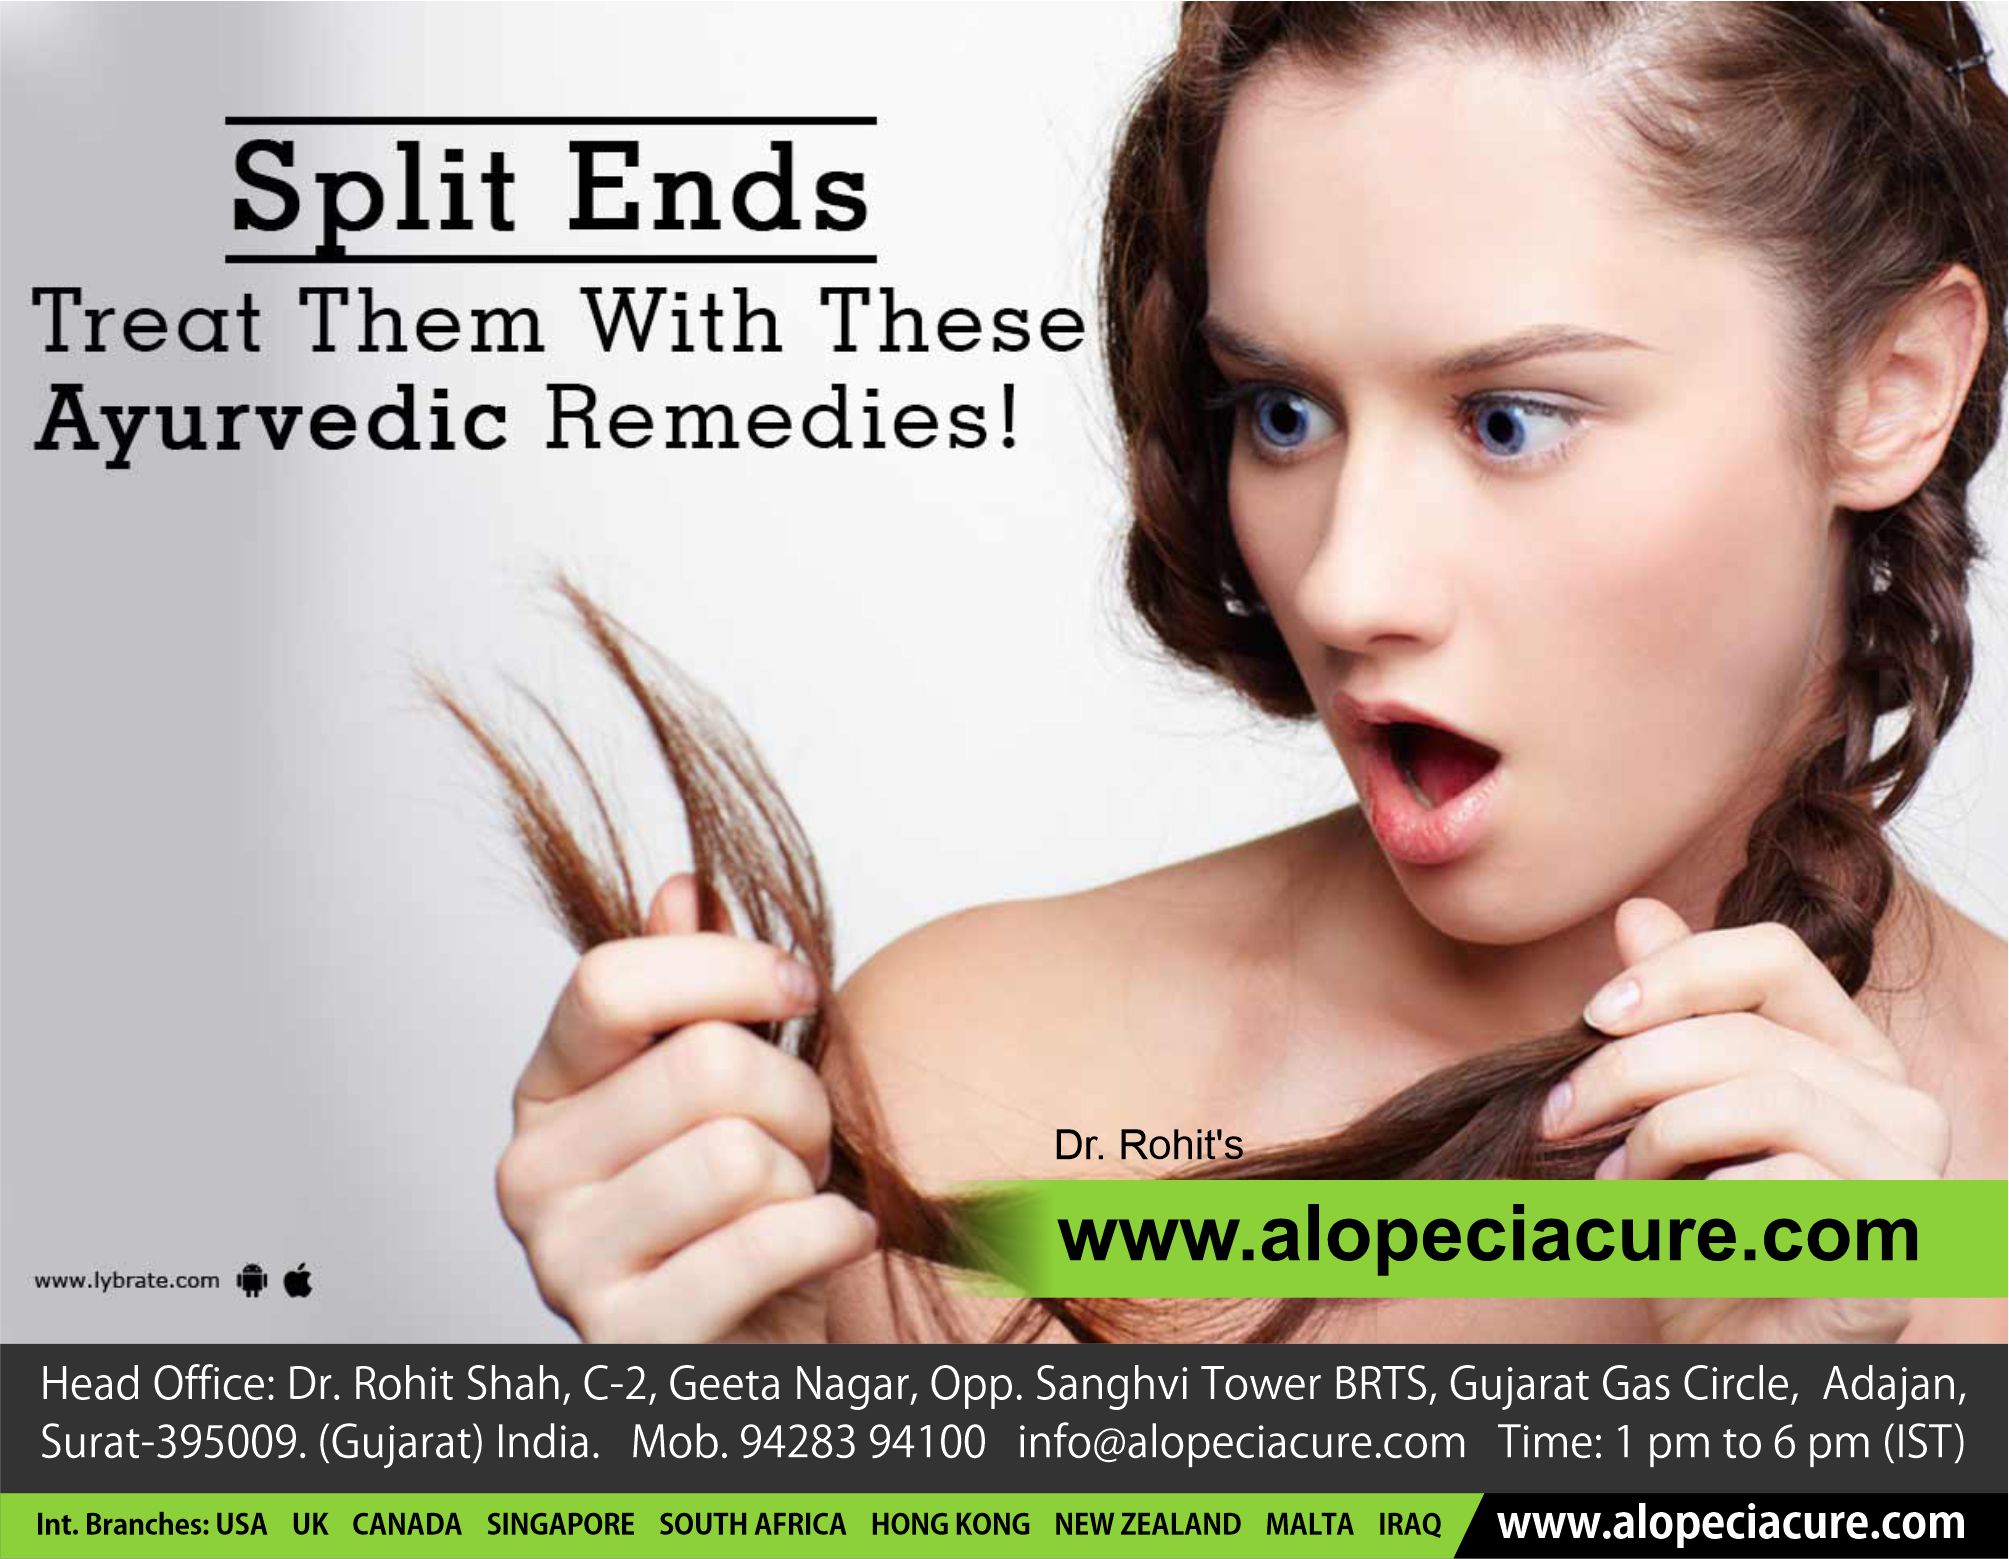 Split Ends - Treat Them With These Ayurvedic Remedies!